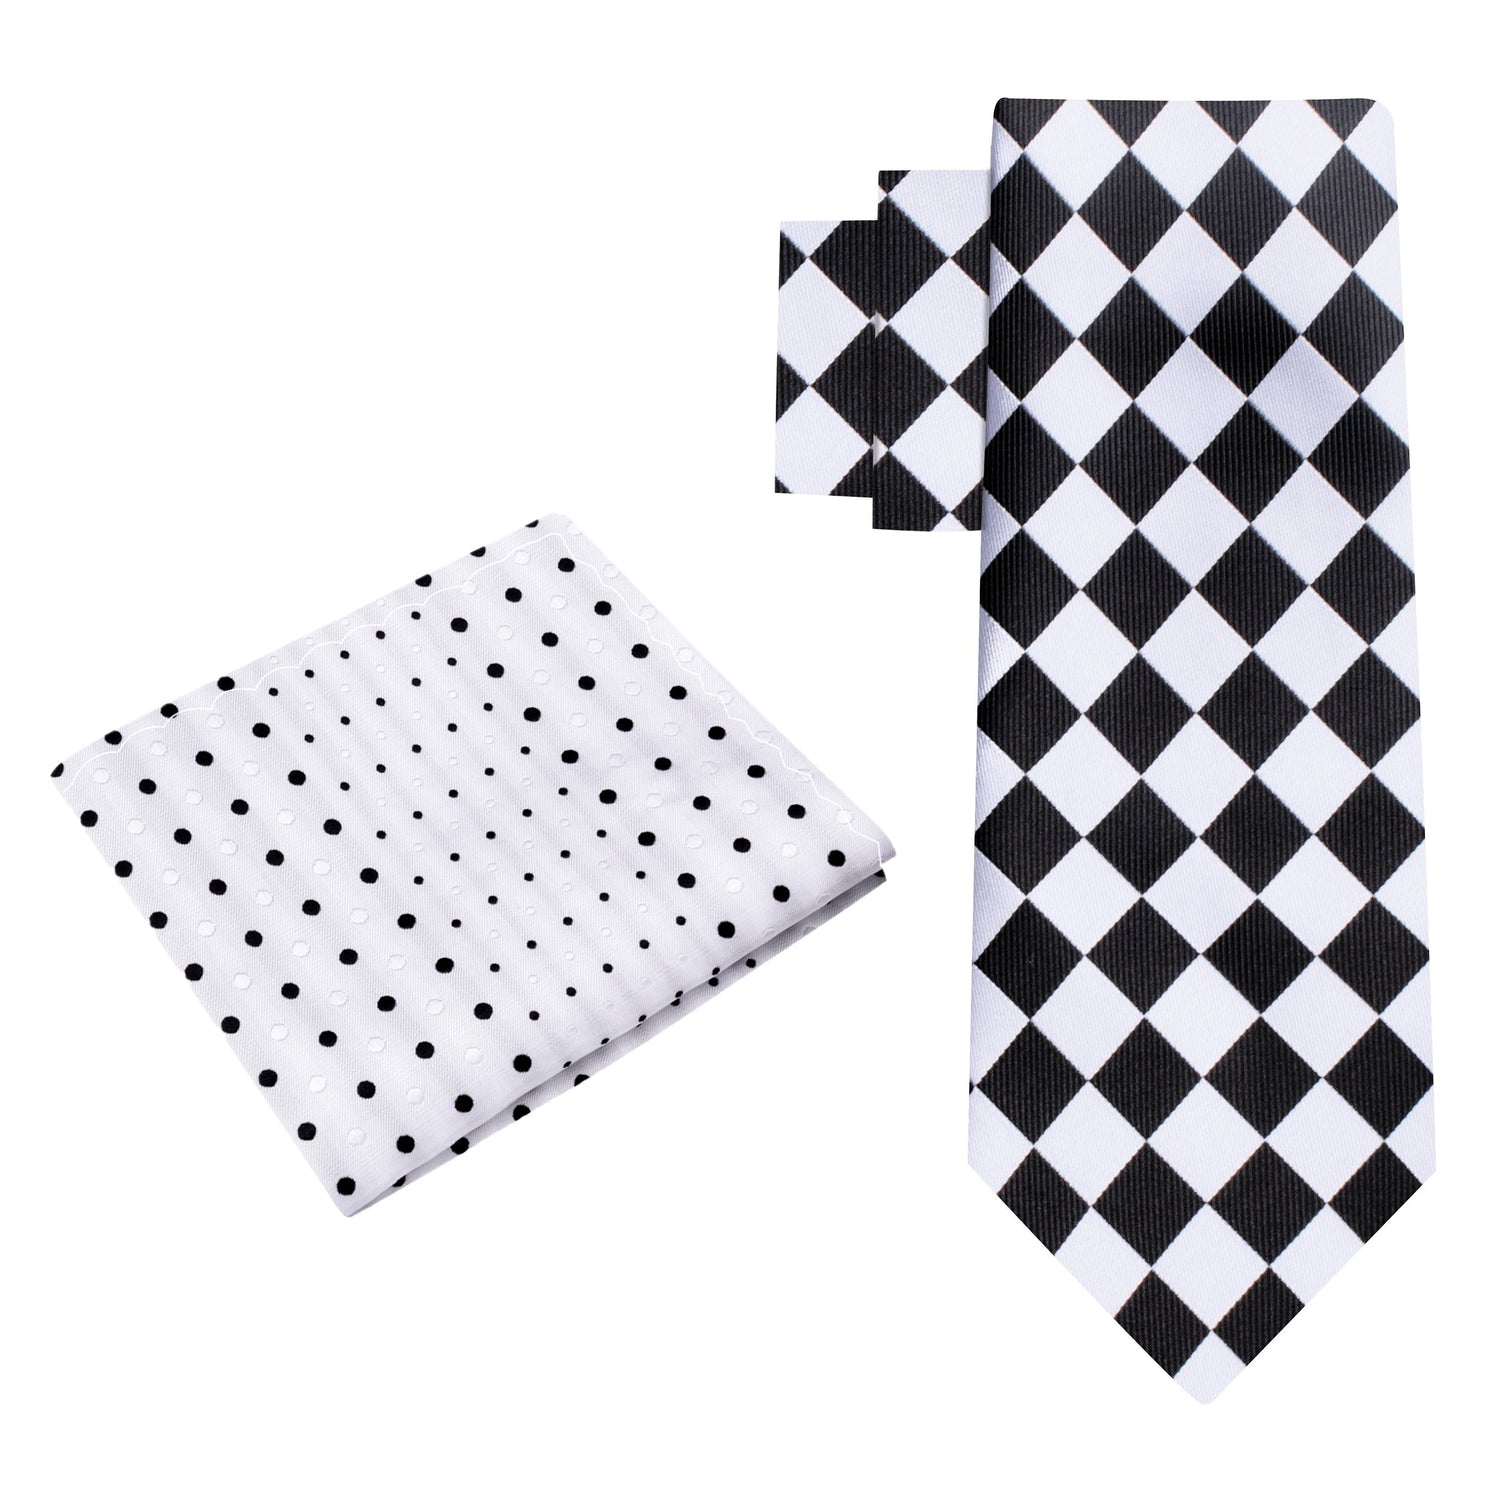 Alt View: Light Grey and Black Checkerboard Tie and White Black Polka Pocket Square